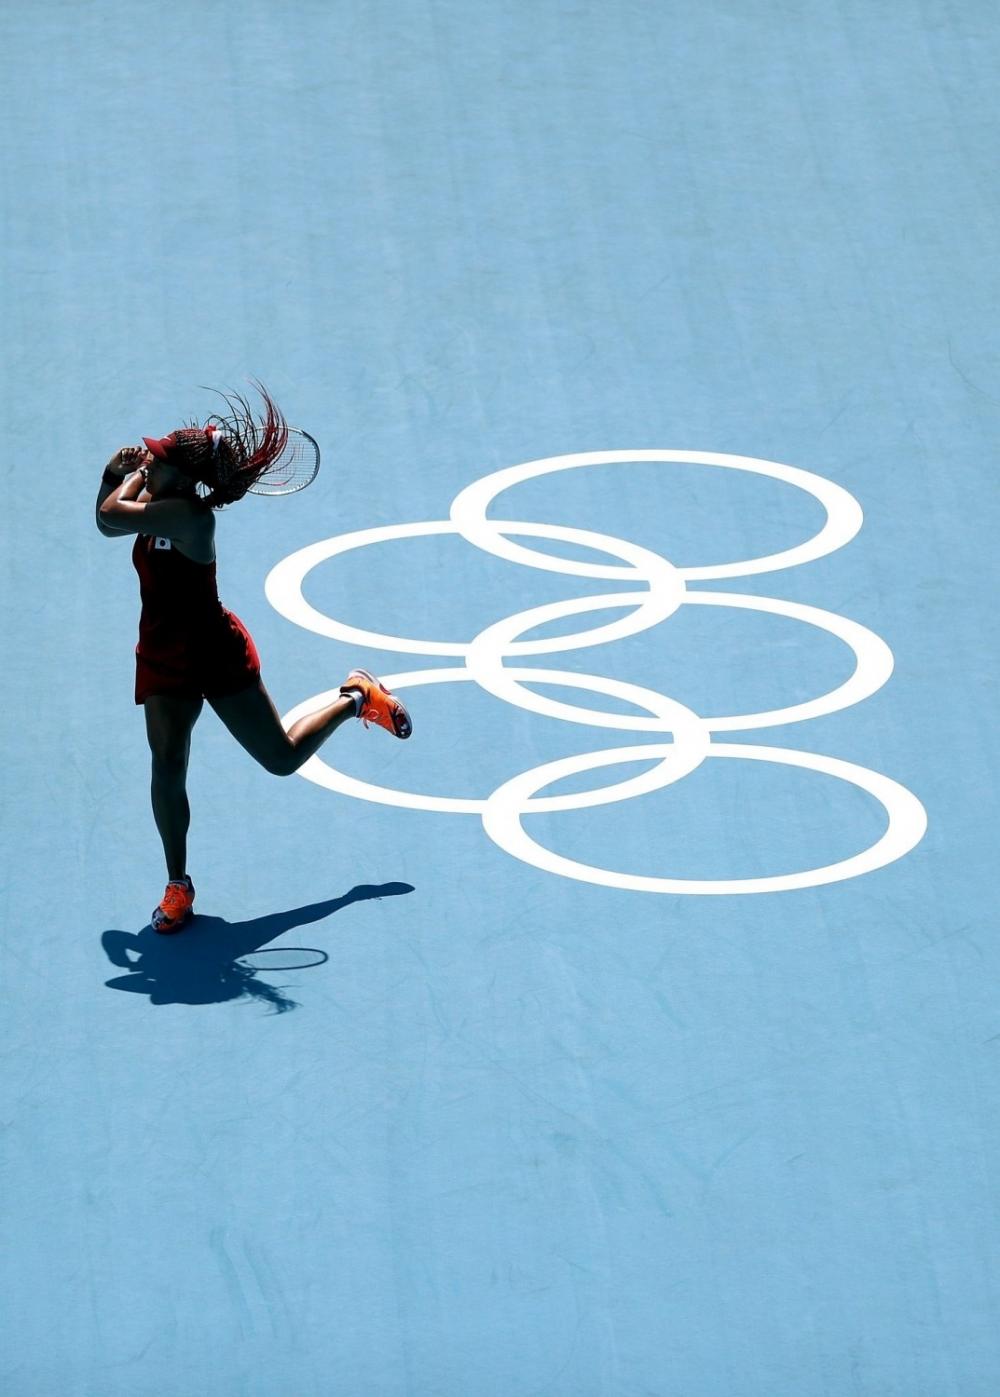 The Weekend Leader - Tennis: Naomi, Barbora breeze into third round at Olympics